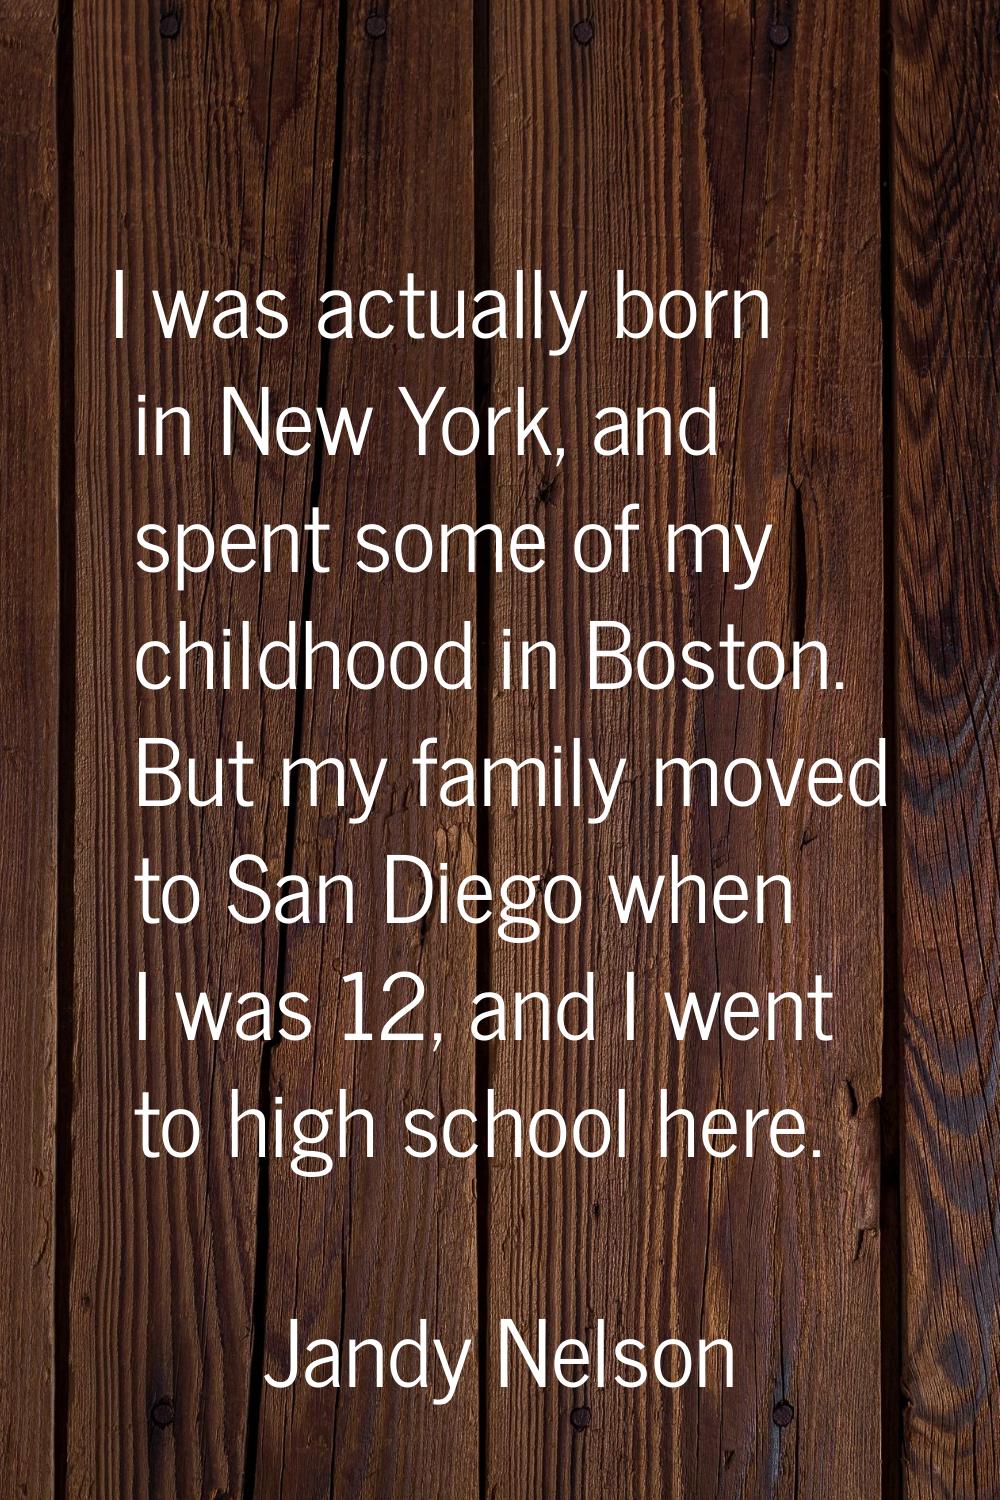 I was actually born in New York, and spent some of my childhood in Boston. But my family moved to S